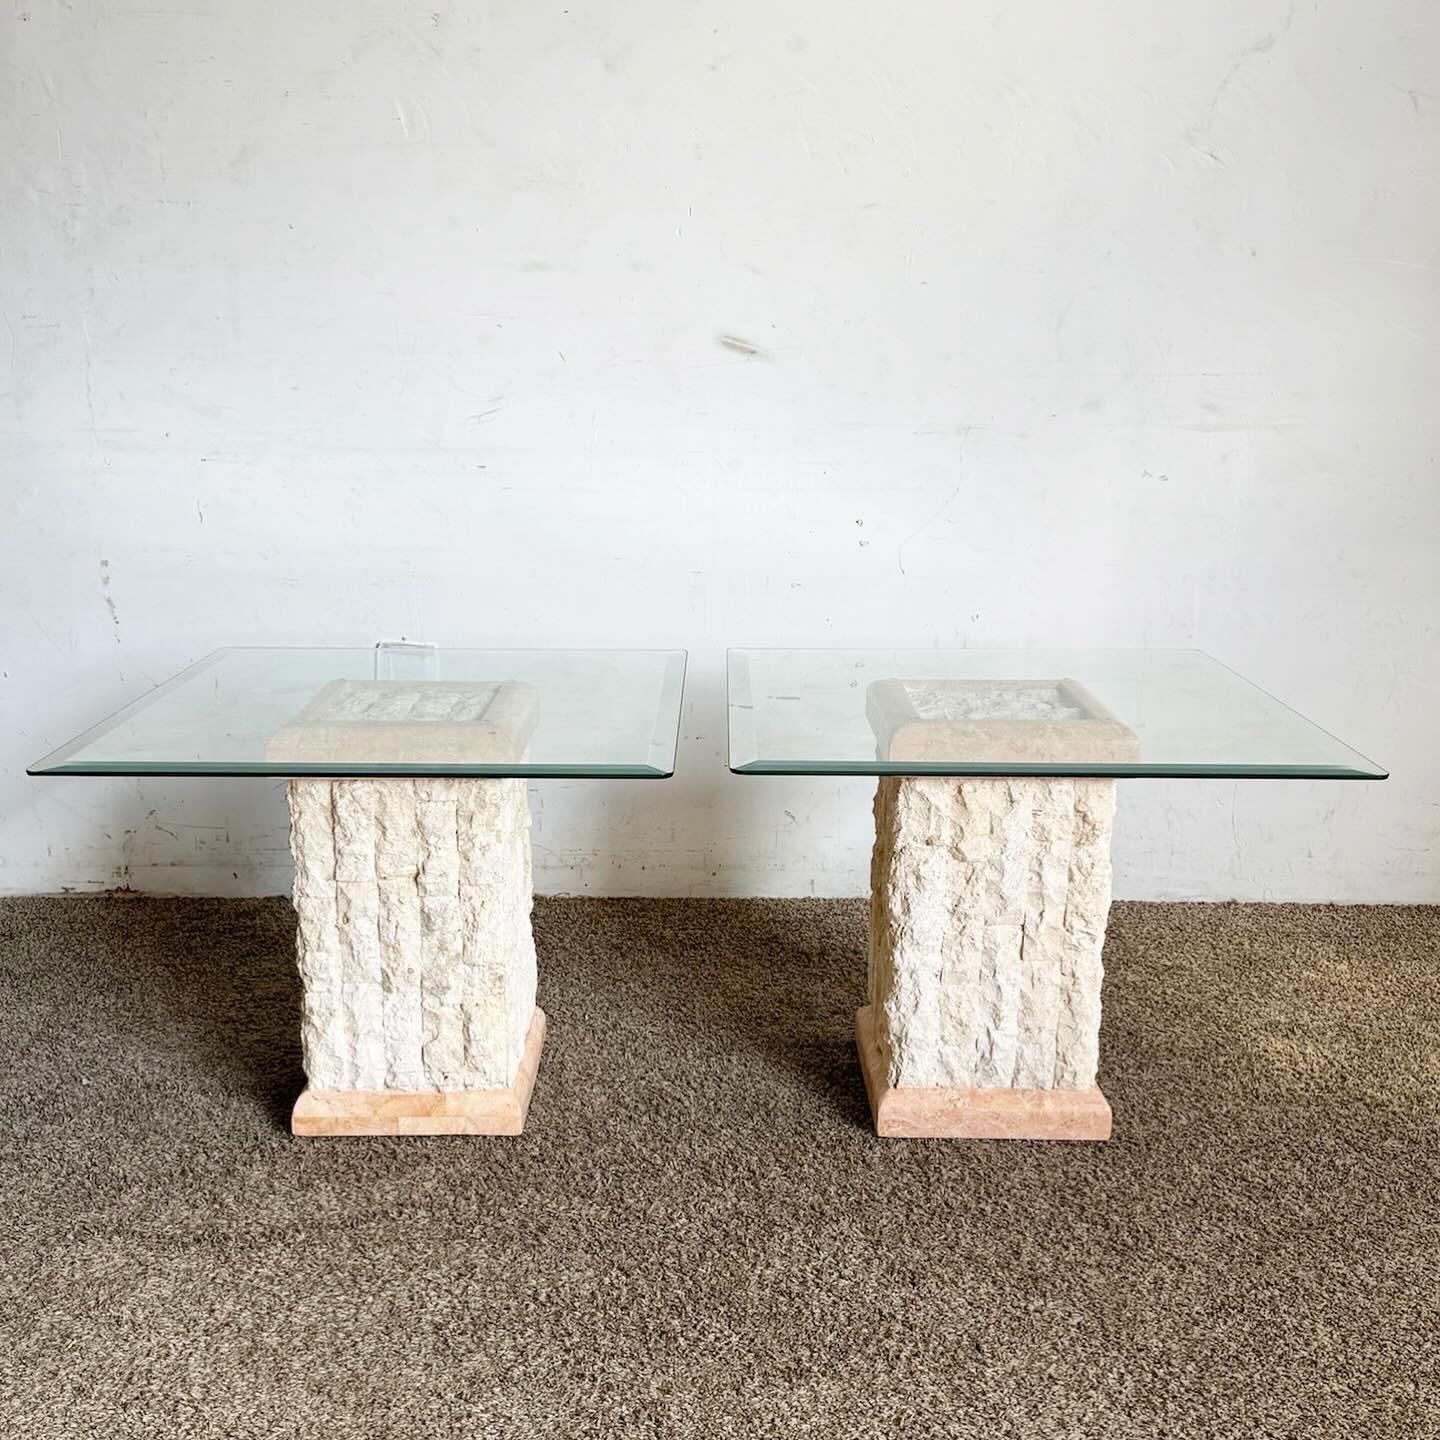 The Postmodern Pink and Beige Tessellated Stone Beveled Glass Top Side Tables, a pair, offer a unique blend of art and elegance. With bases made of tessellated stone in pink and beige, they create a captivating pattern. The beveled glass tops add